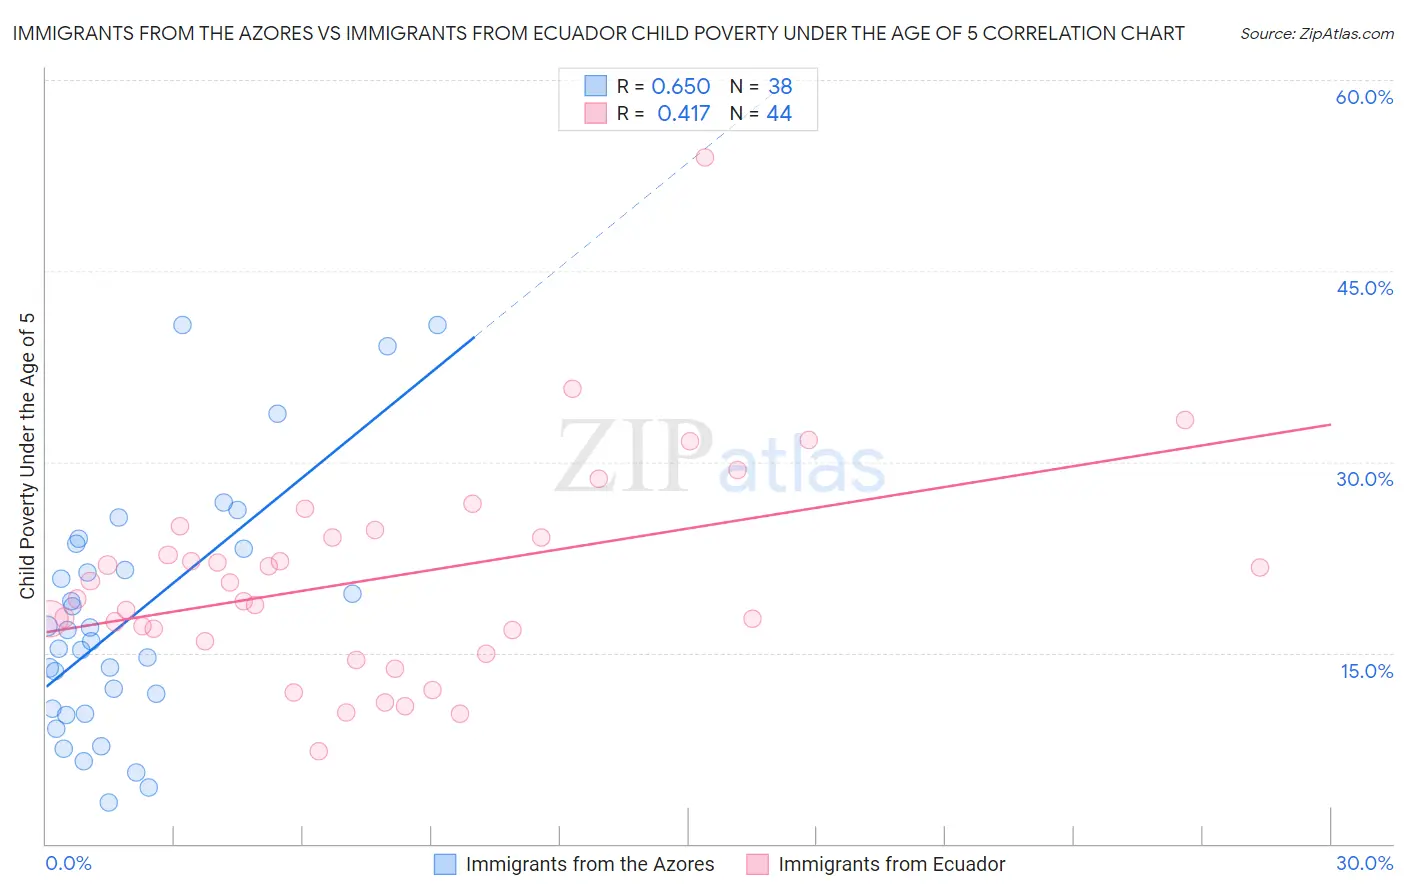 Immigrants from the Azores vs Immigrants from Ecuador Child Poverty Under the Age of 5